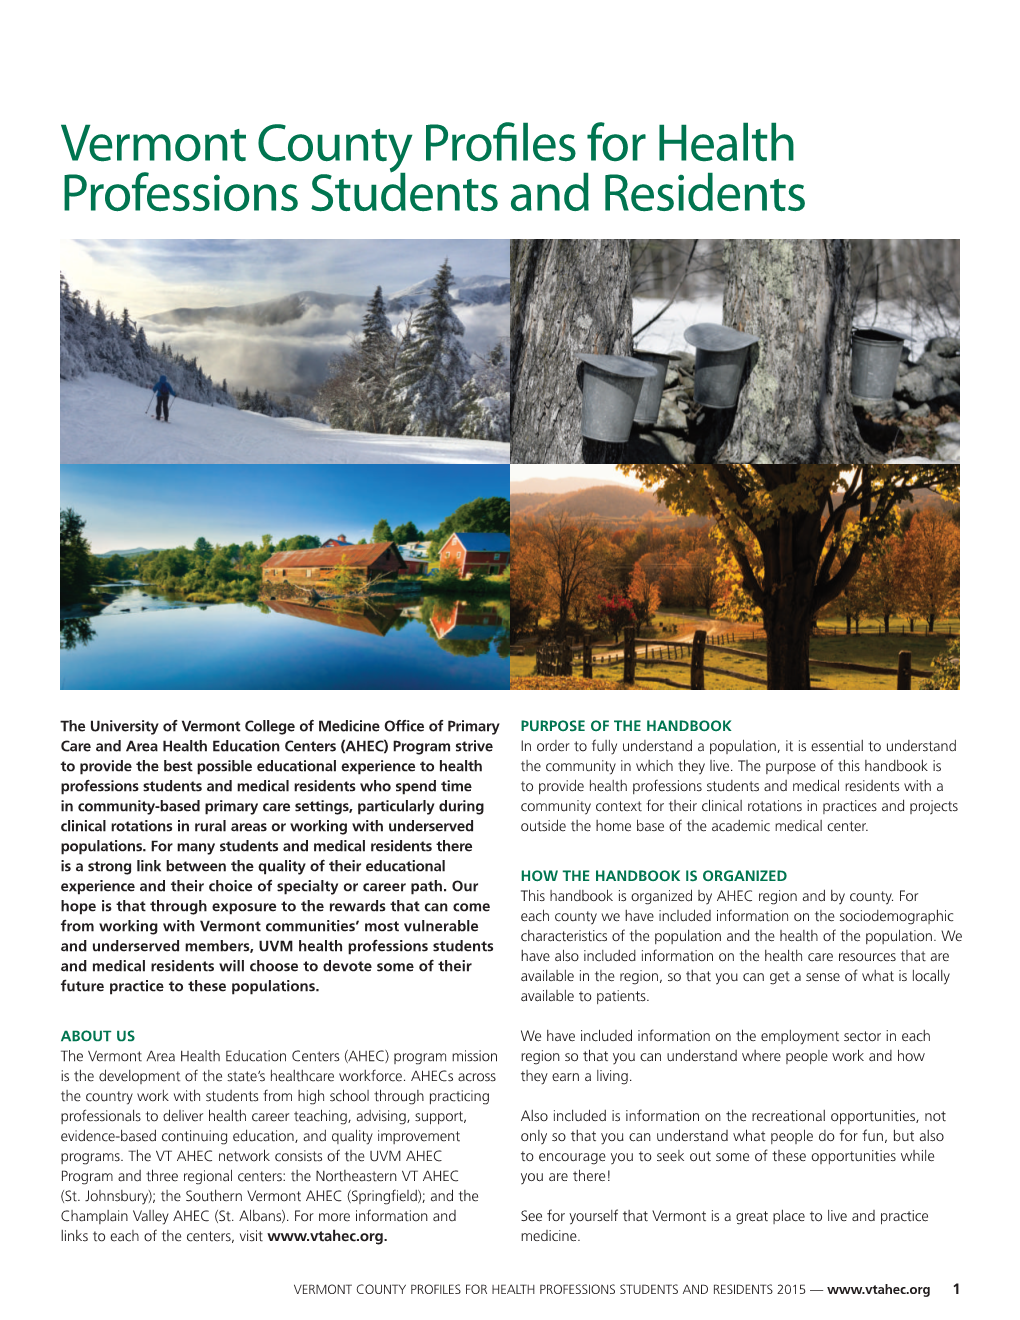 Vermont County Profiles for Health Professions Students and Residents